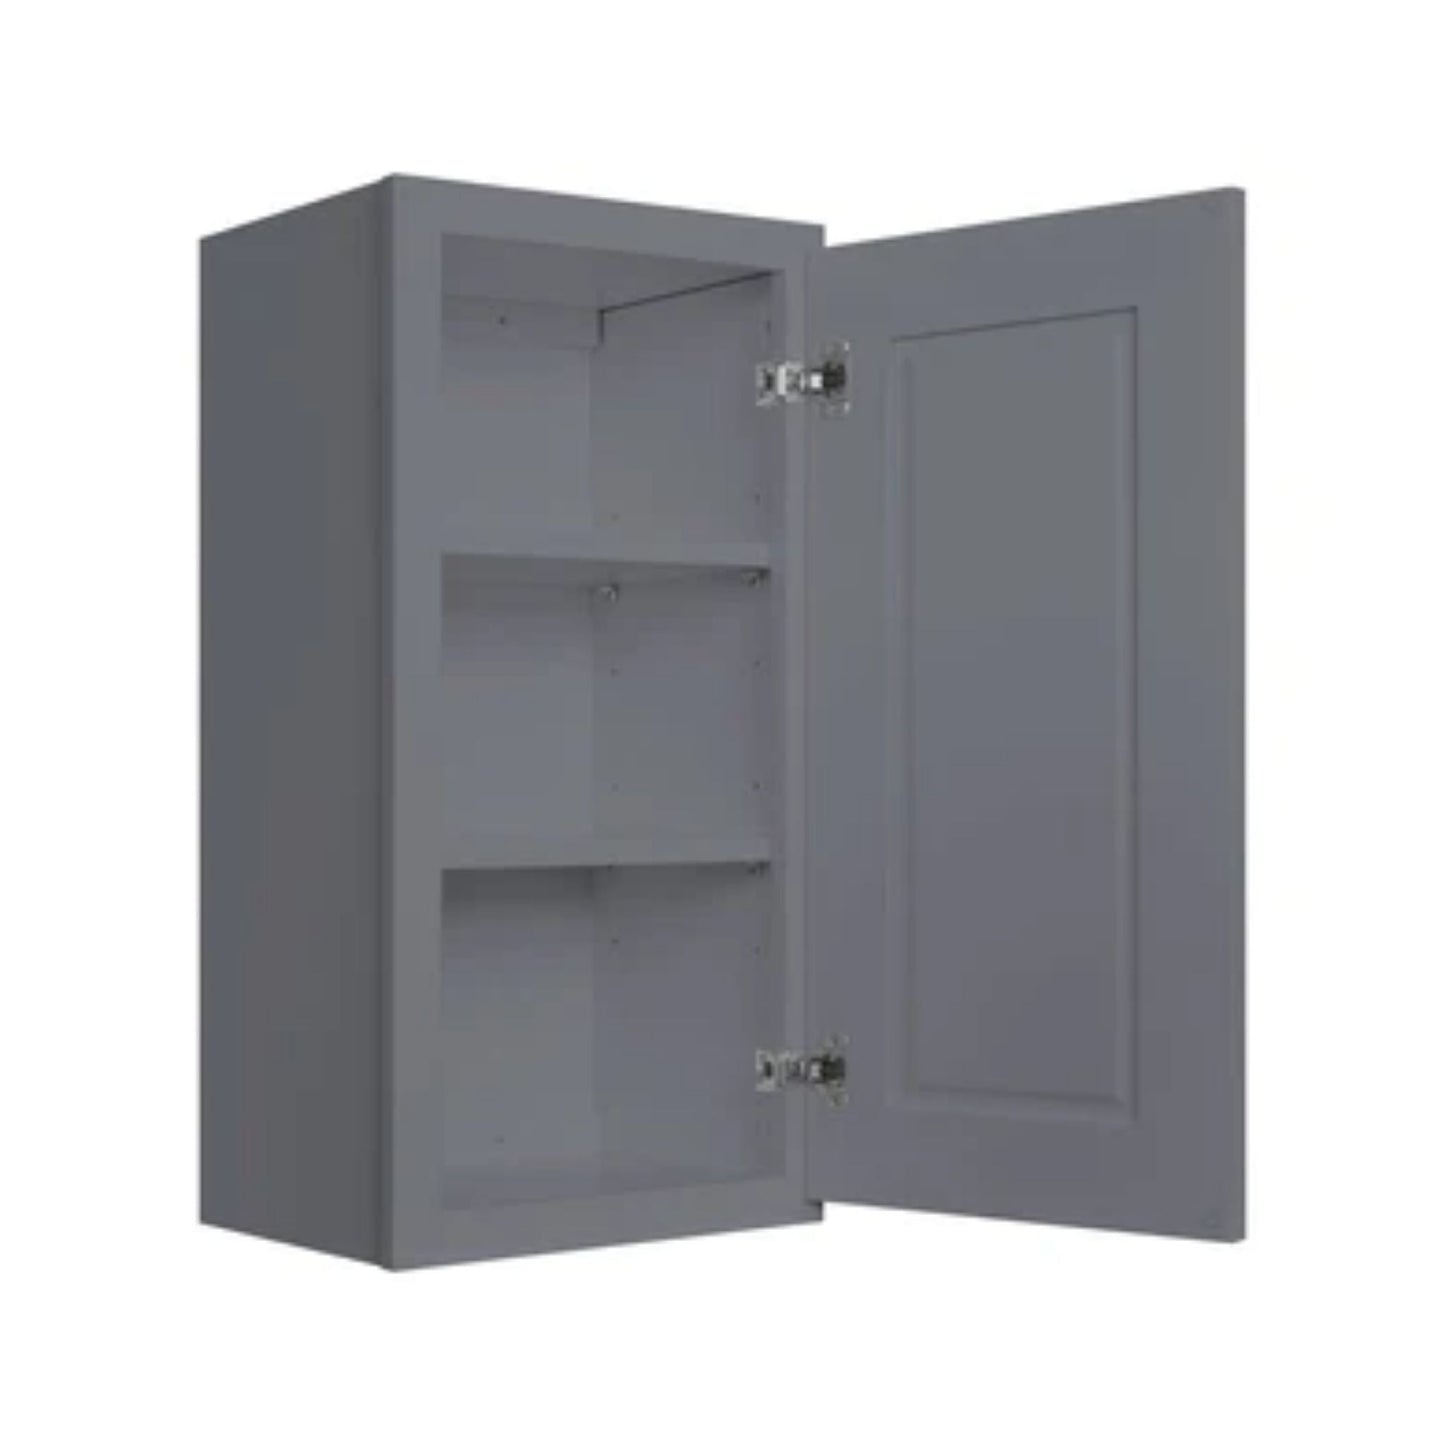 LessCare 30" x 42" x 12" Colonial Gray Wall Kitchen Cabinet - W3042